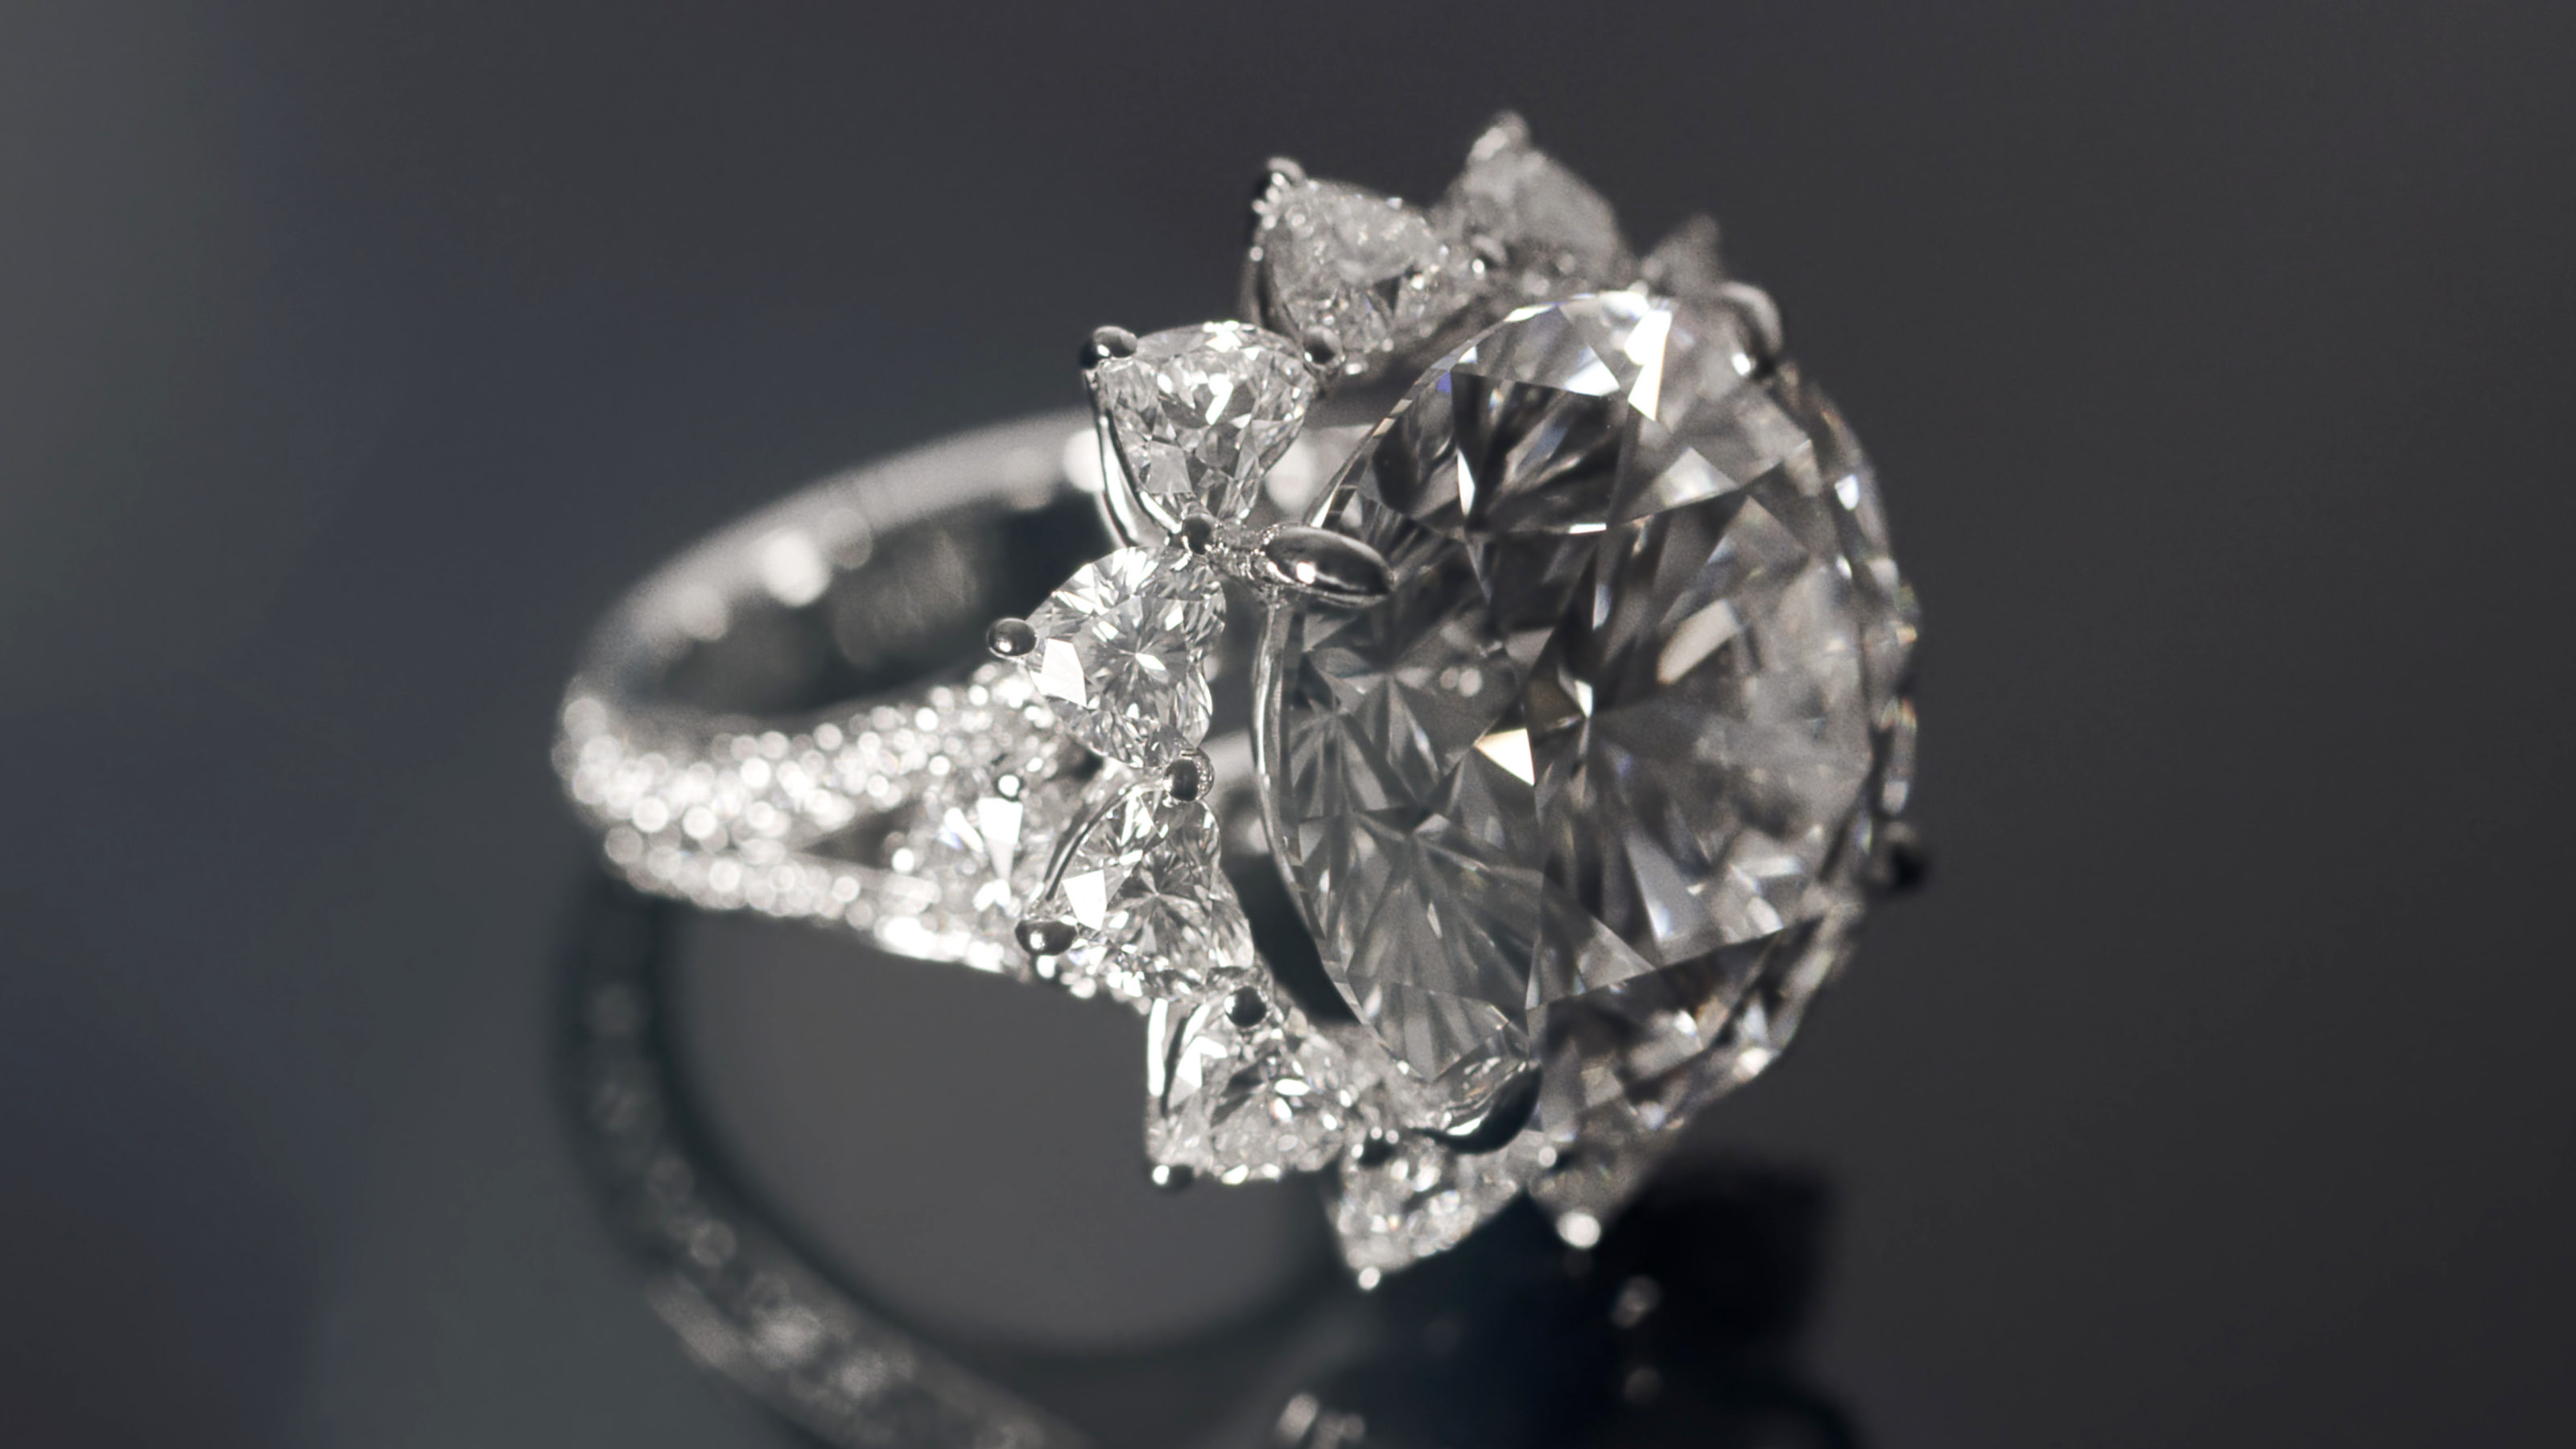 What Makes Graff Diamond Jewelry So Special? - Only Natural Diamonds